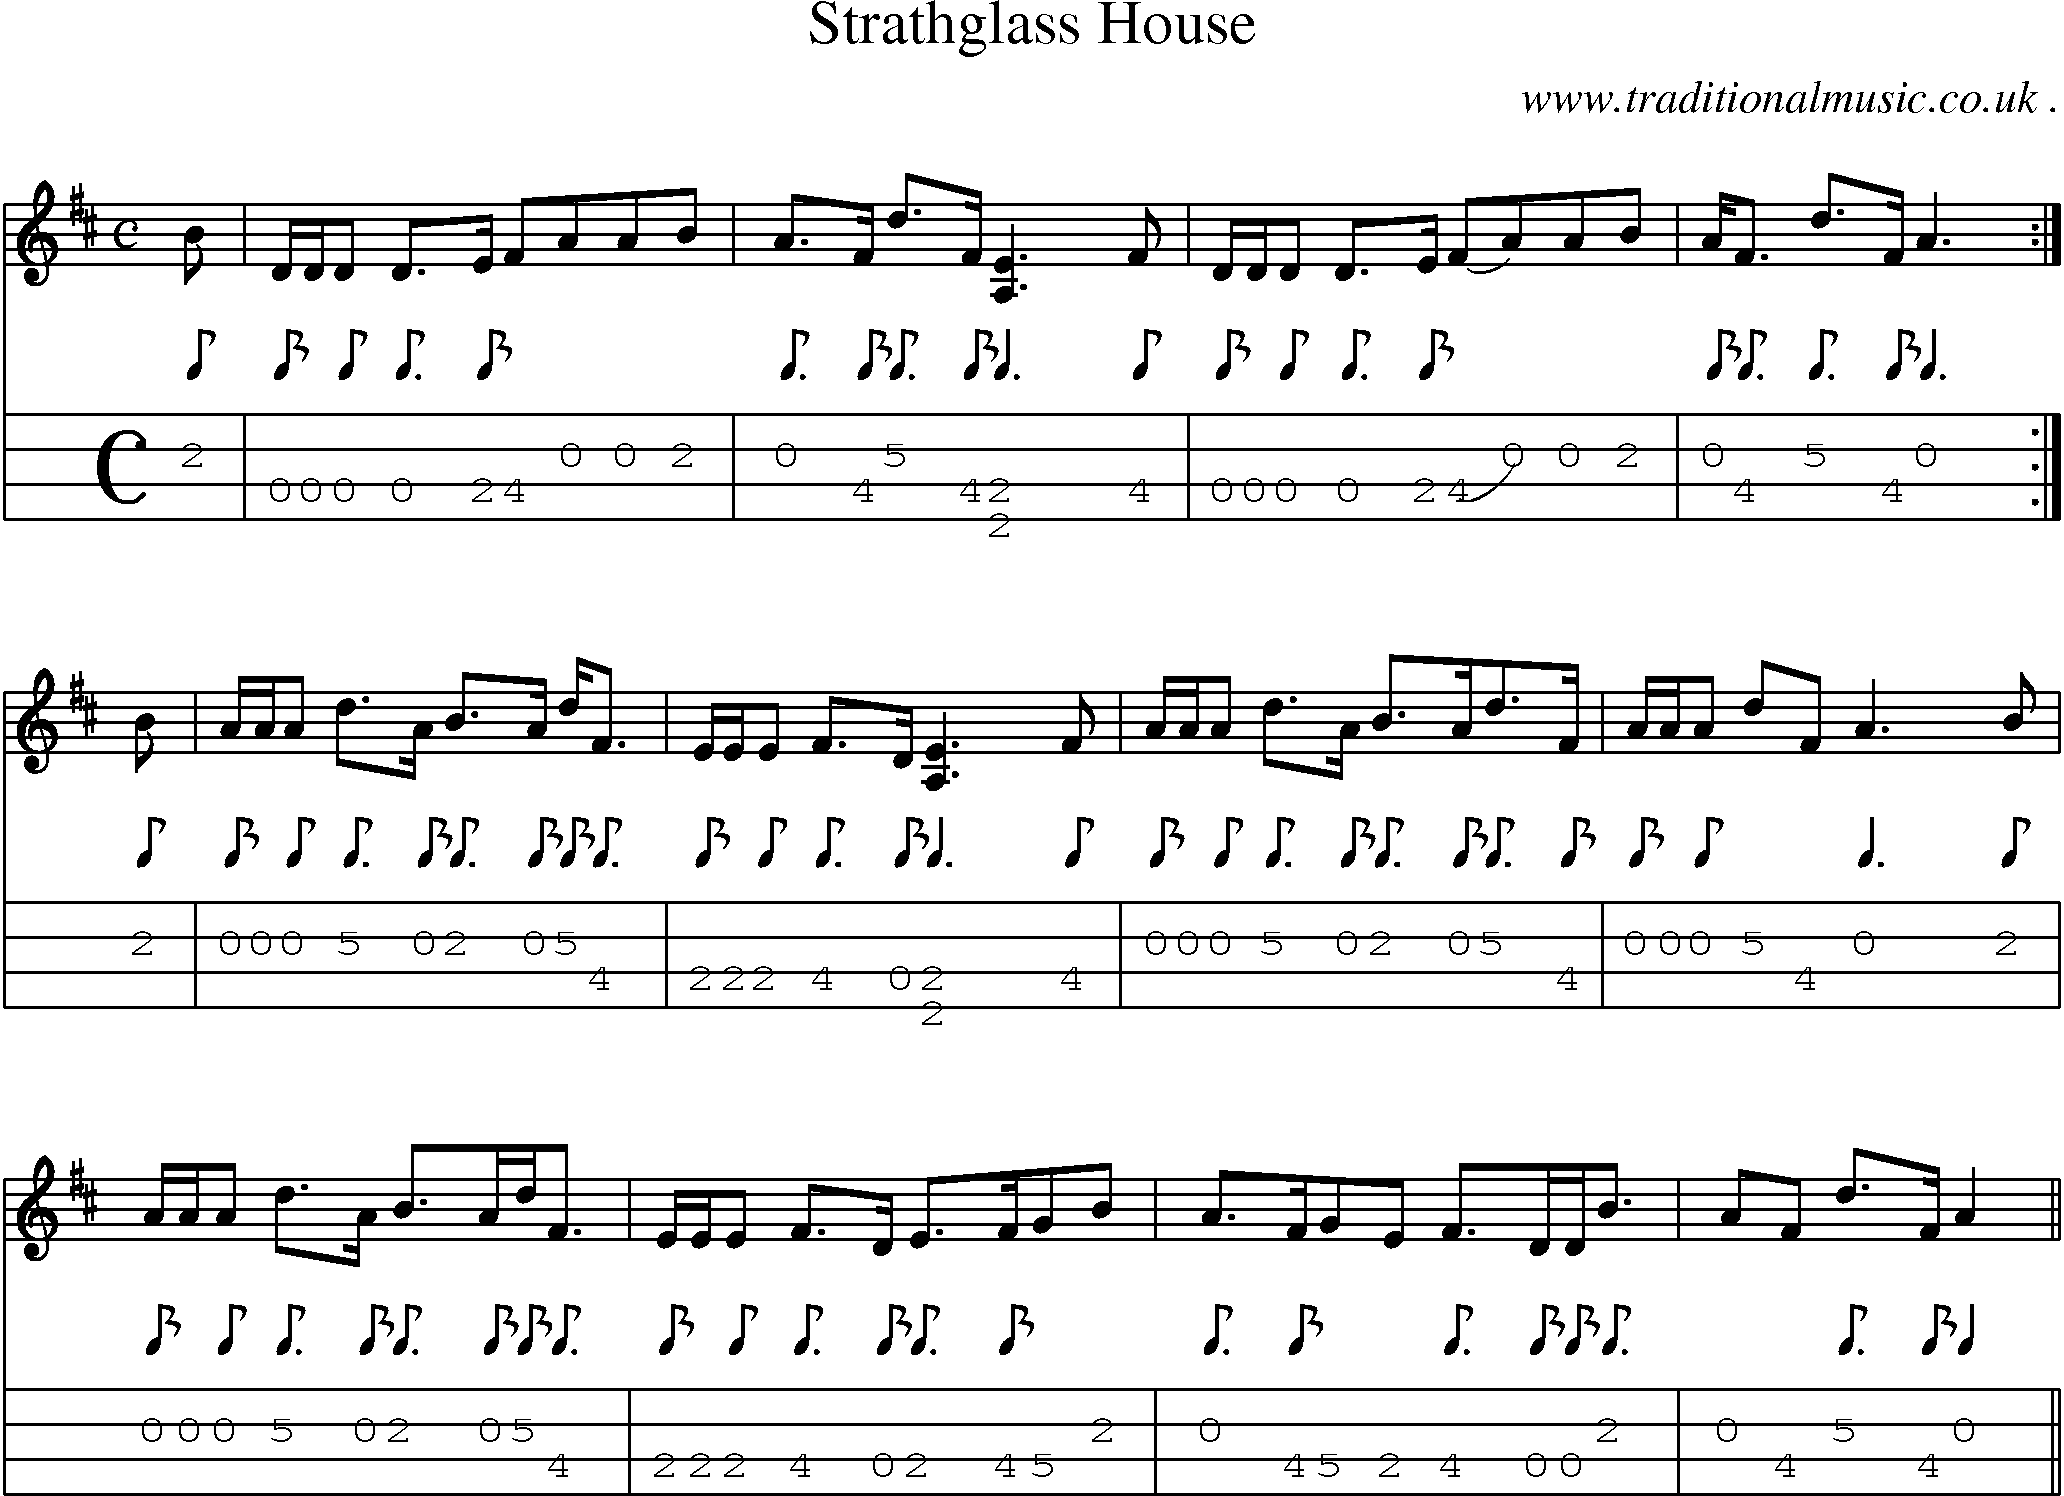 Sheet-music  score, Chords and Mandolin Tabs for Strathglass House